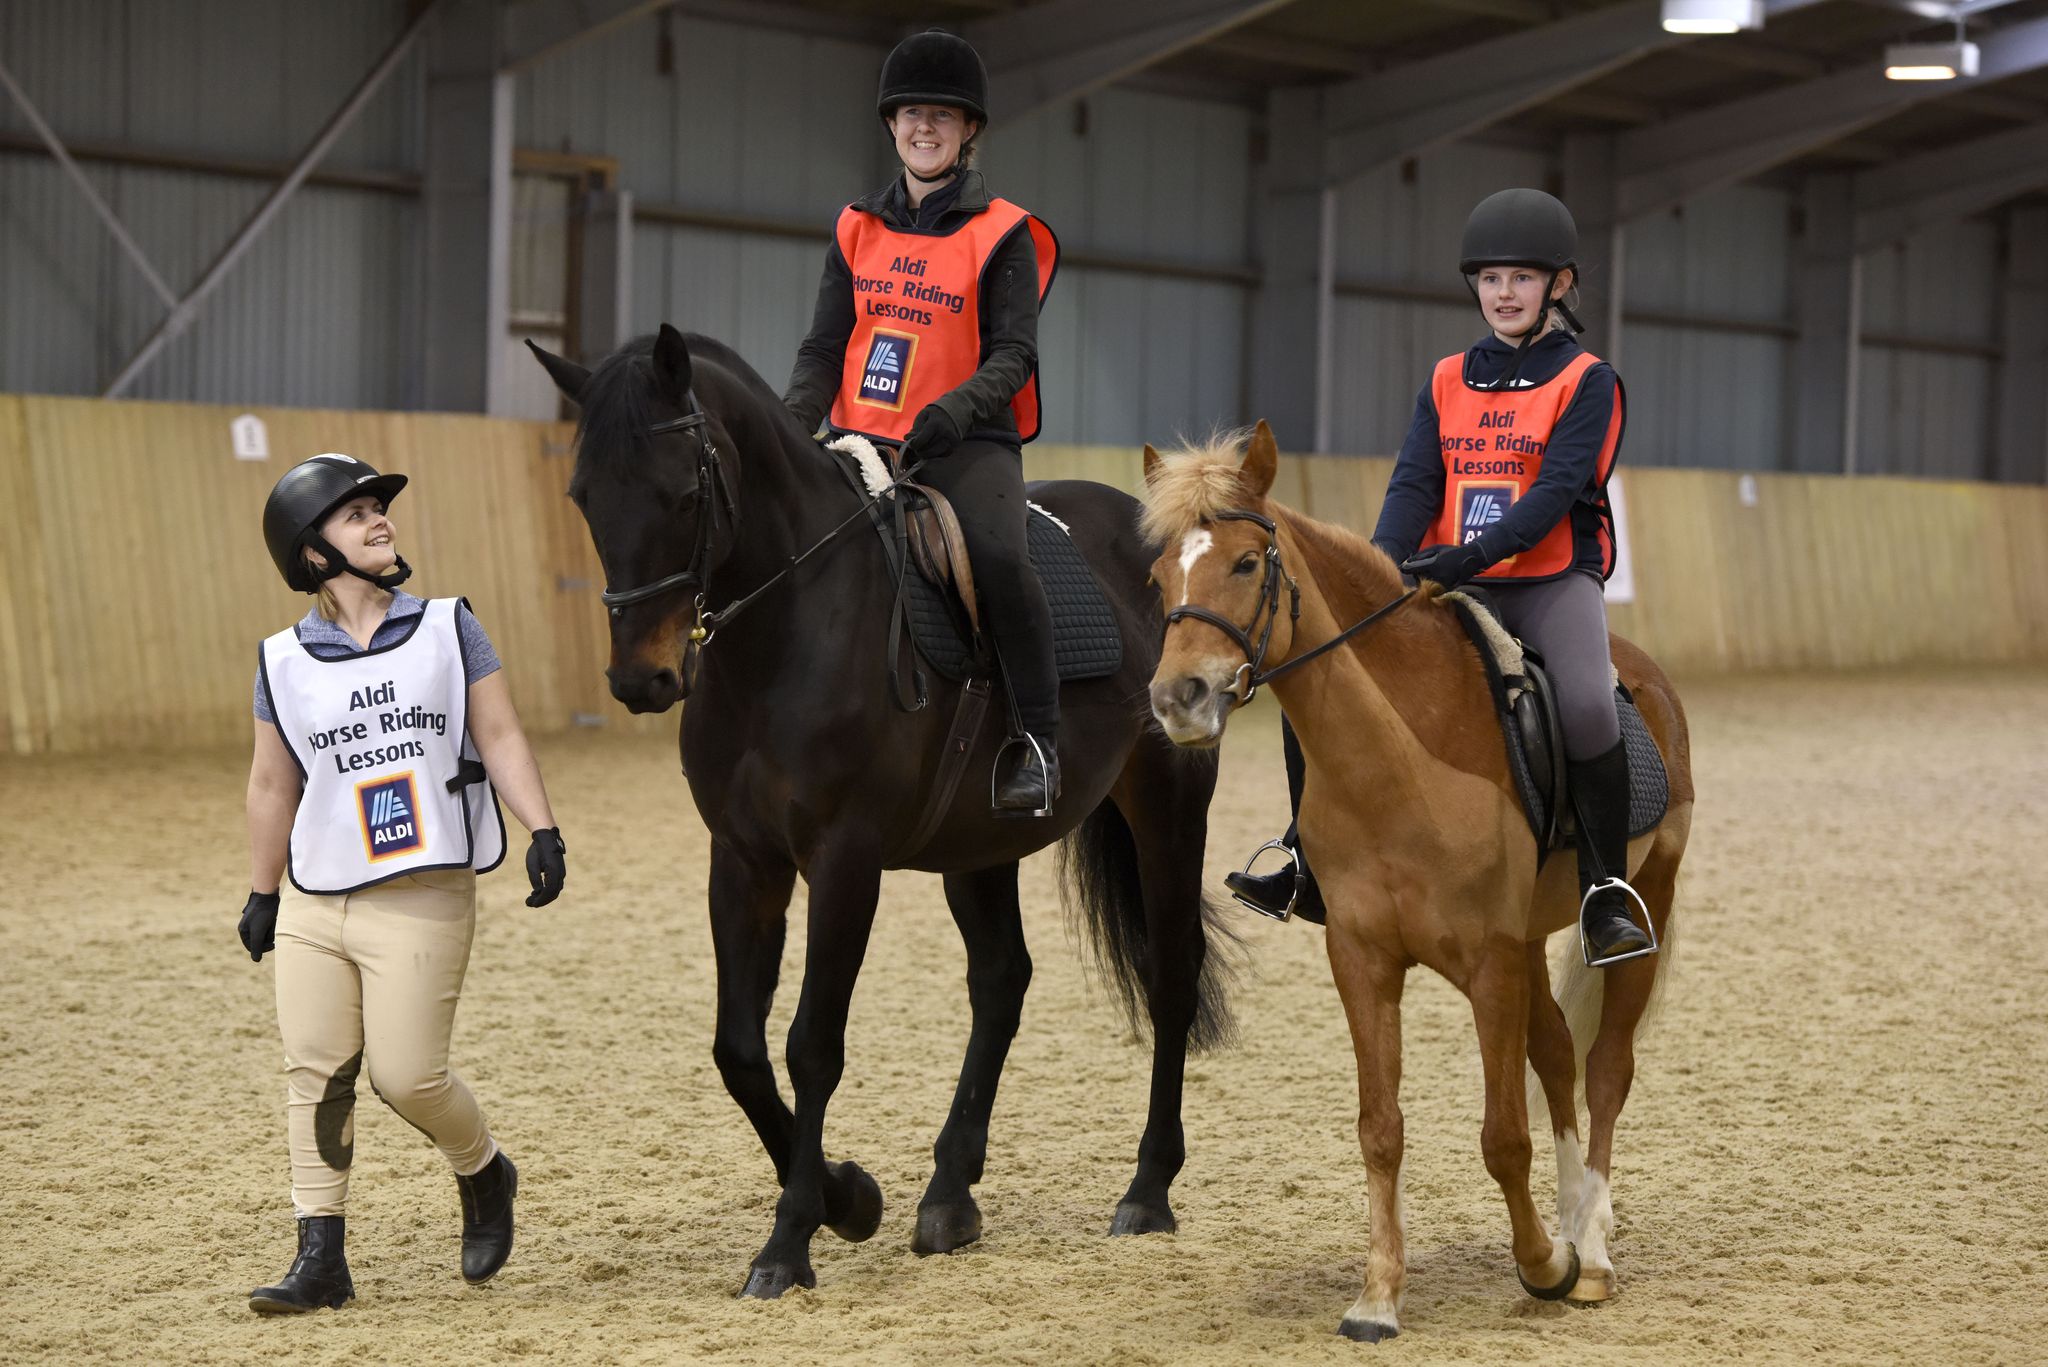 Aldi Summer Equestrian - horse riding lessons - two riders